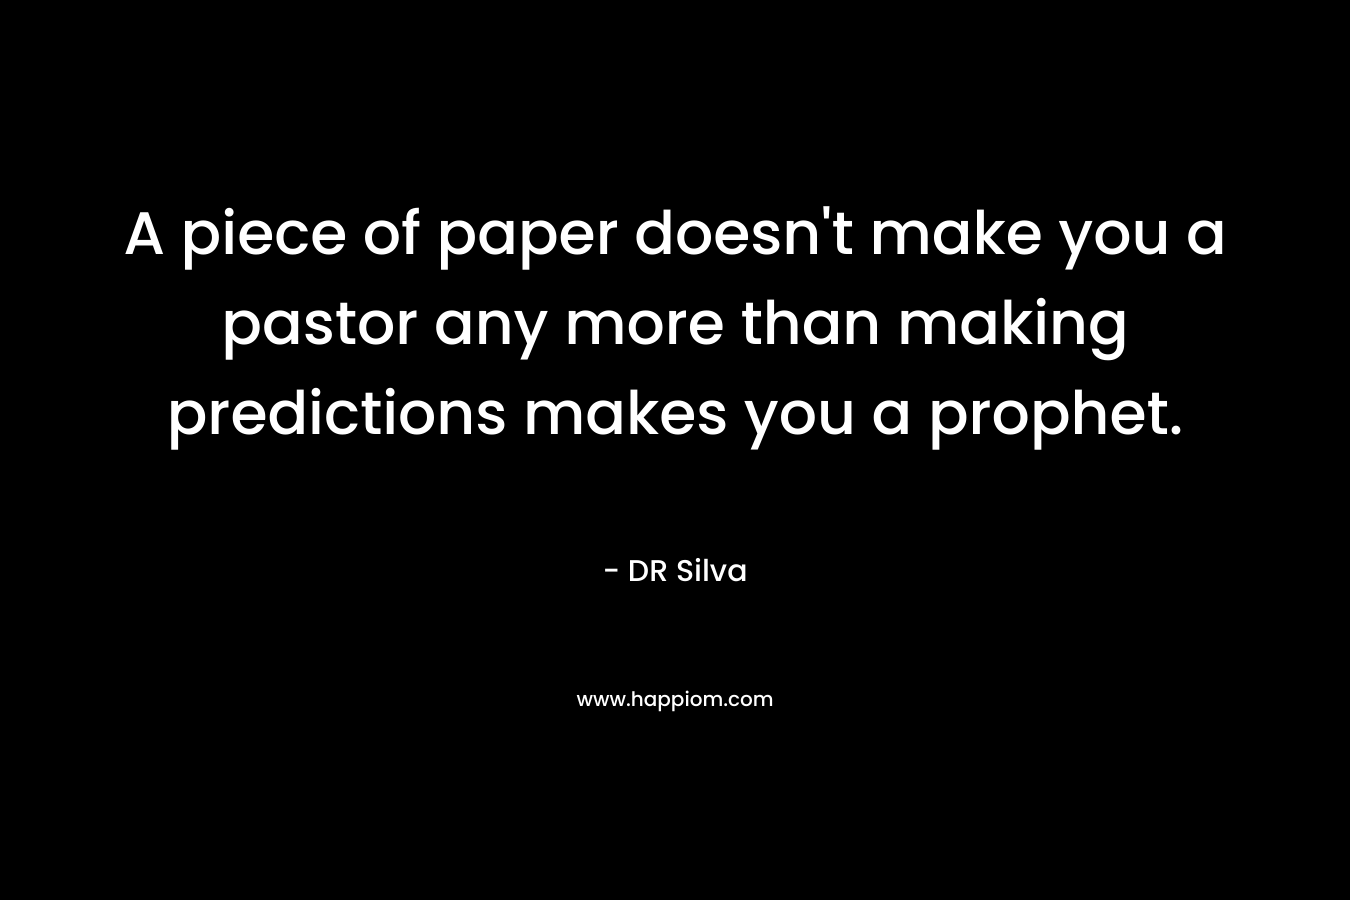 A piece of paper doesn’t make you a pastor any more than making predictions makes you a prophet. – DR Silva